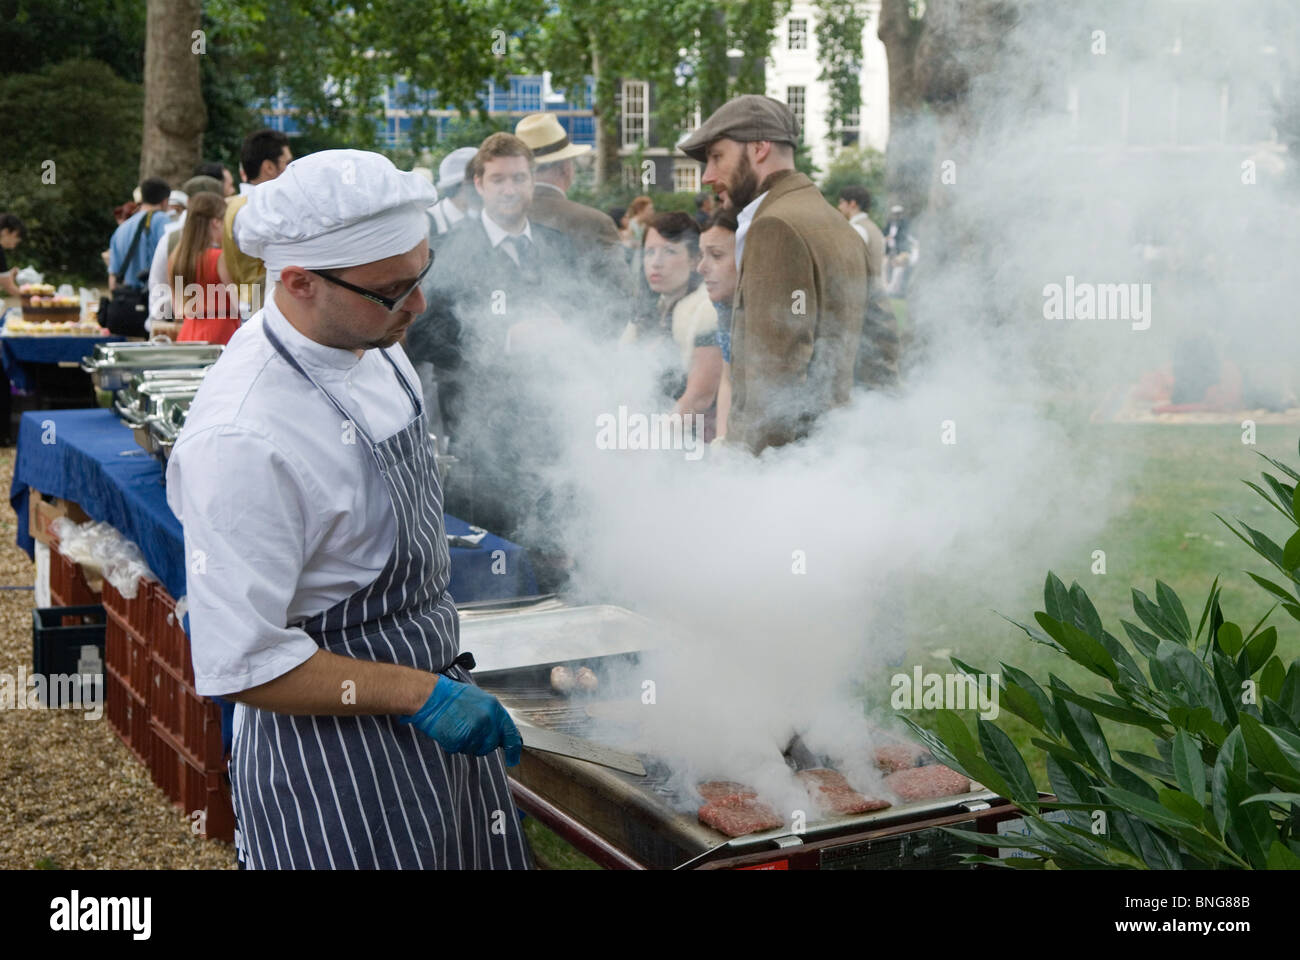 The Chap Olympiad Bedford Square London UK. HOMER SYKES Stock Photo